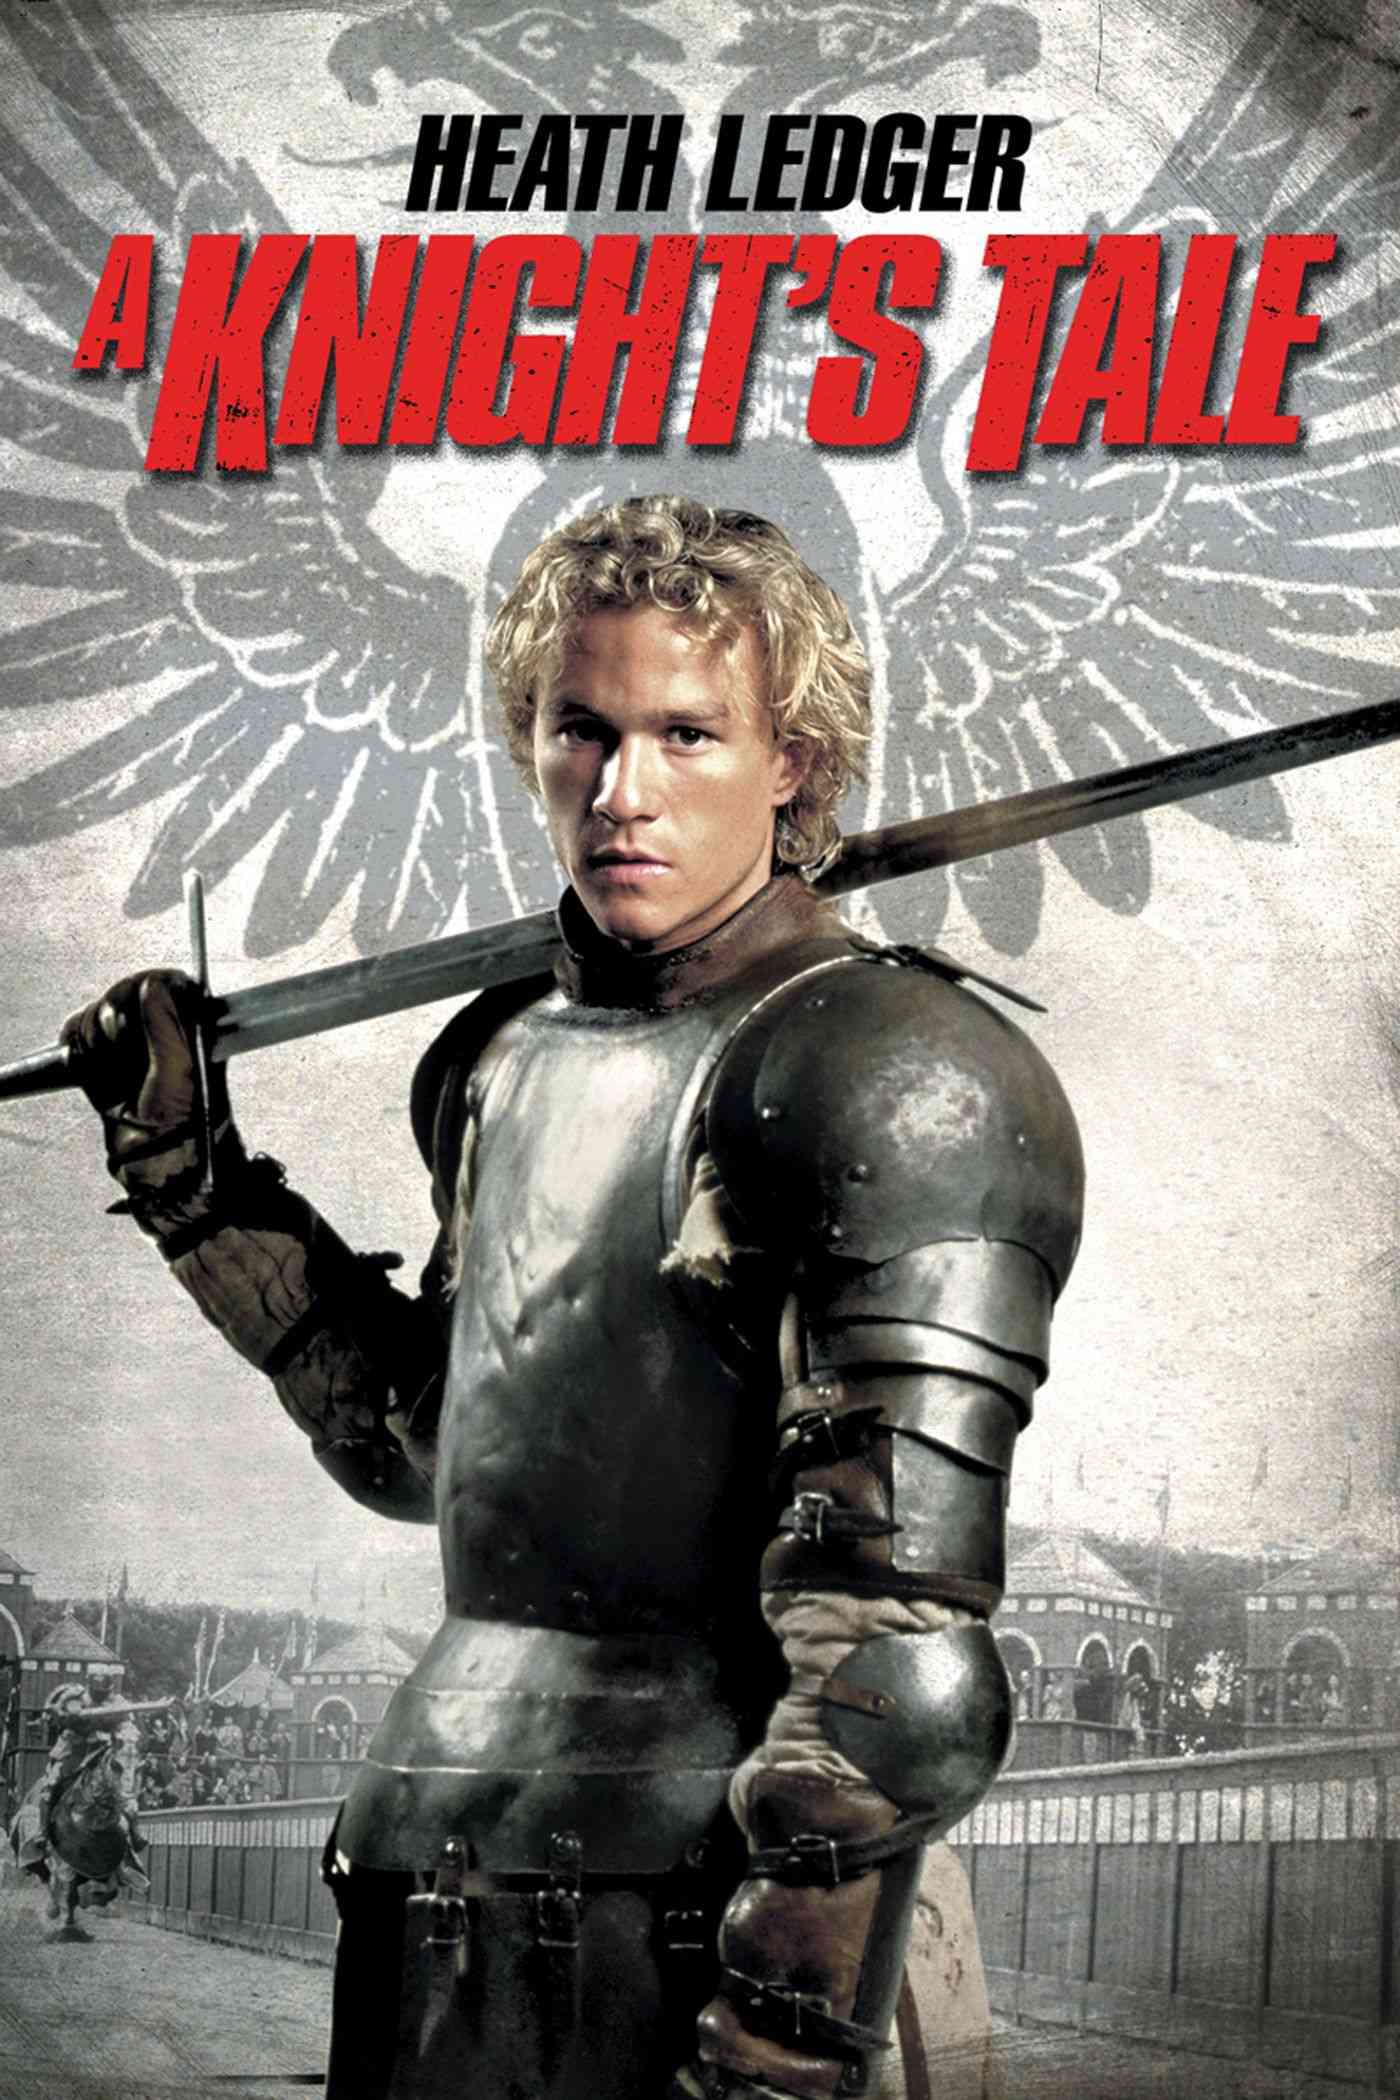 FULL MOVIE: A Knight’s Tale (2001) [Action]